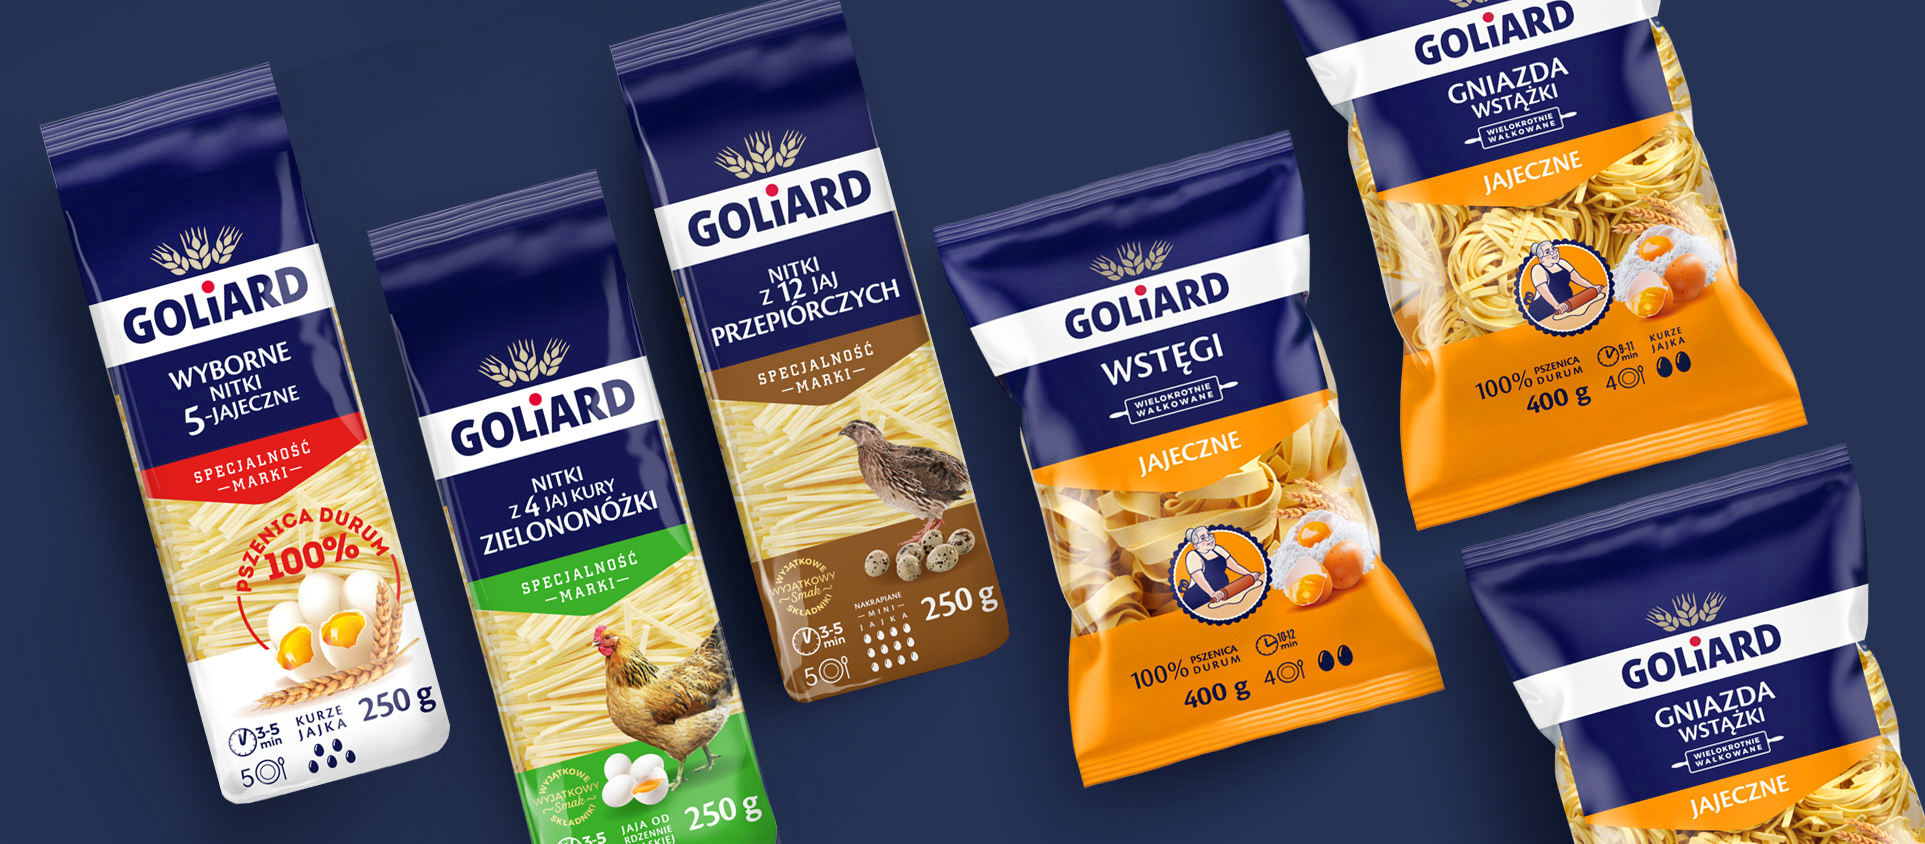 Pasta packaging design for Goliard - various products.